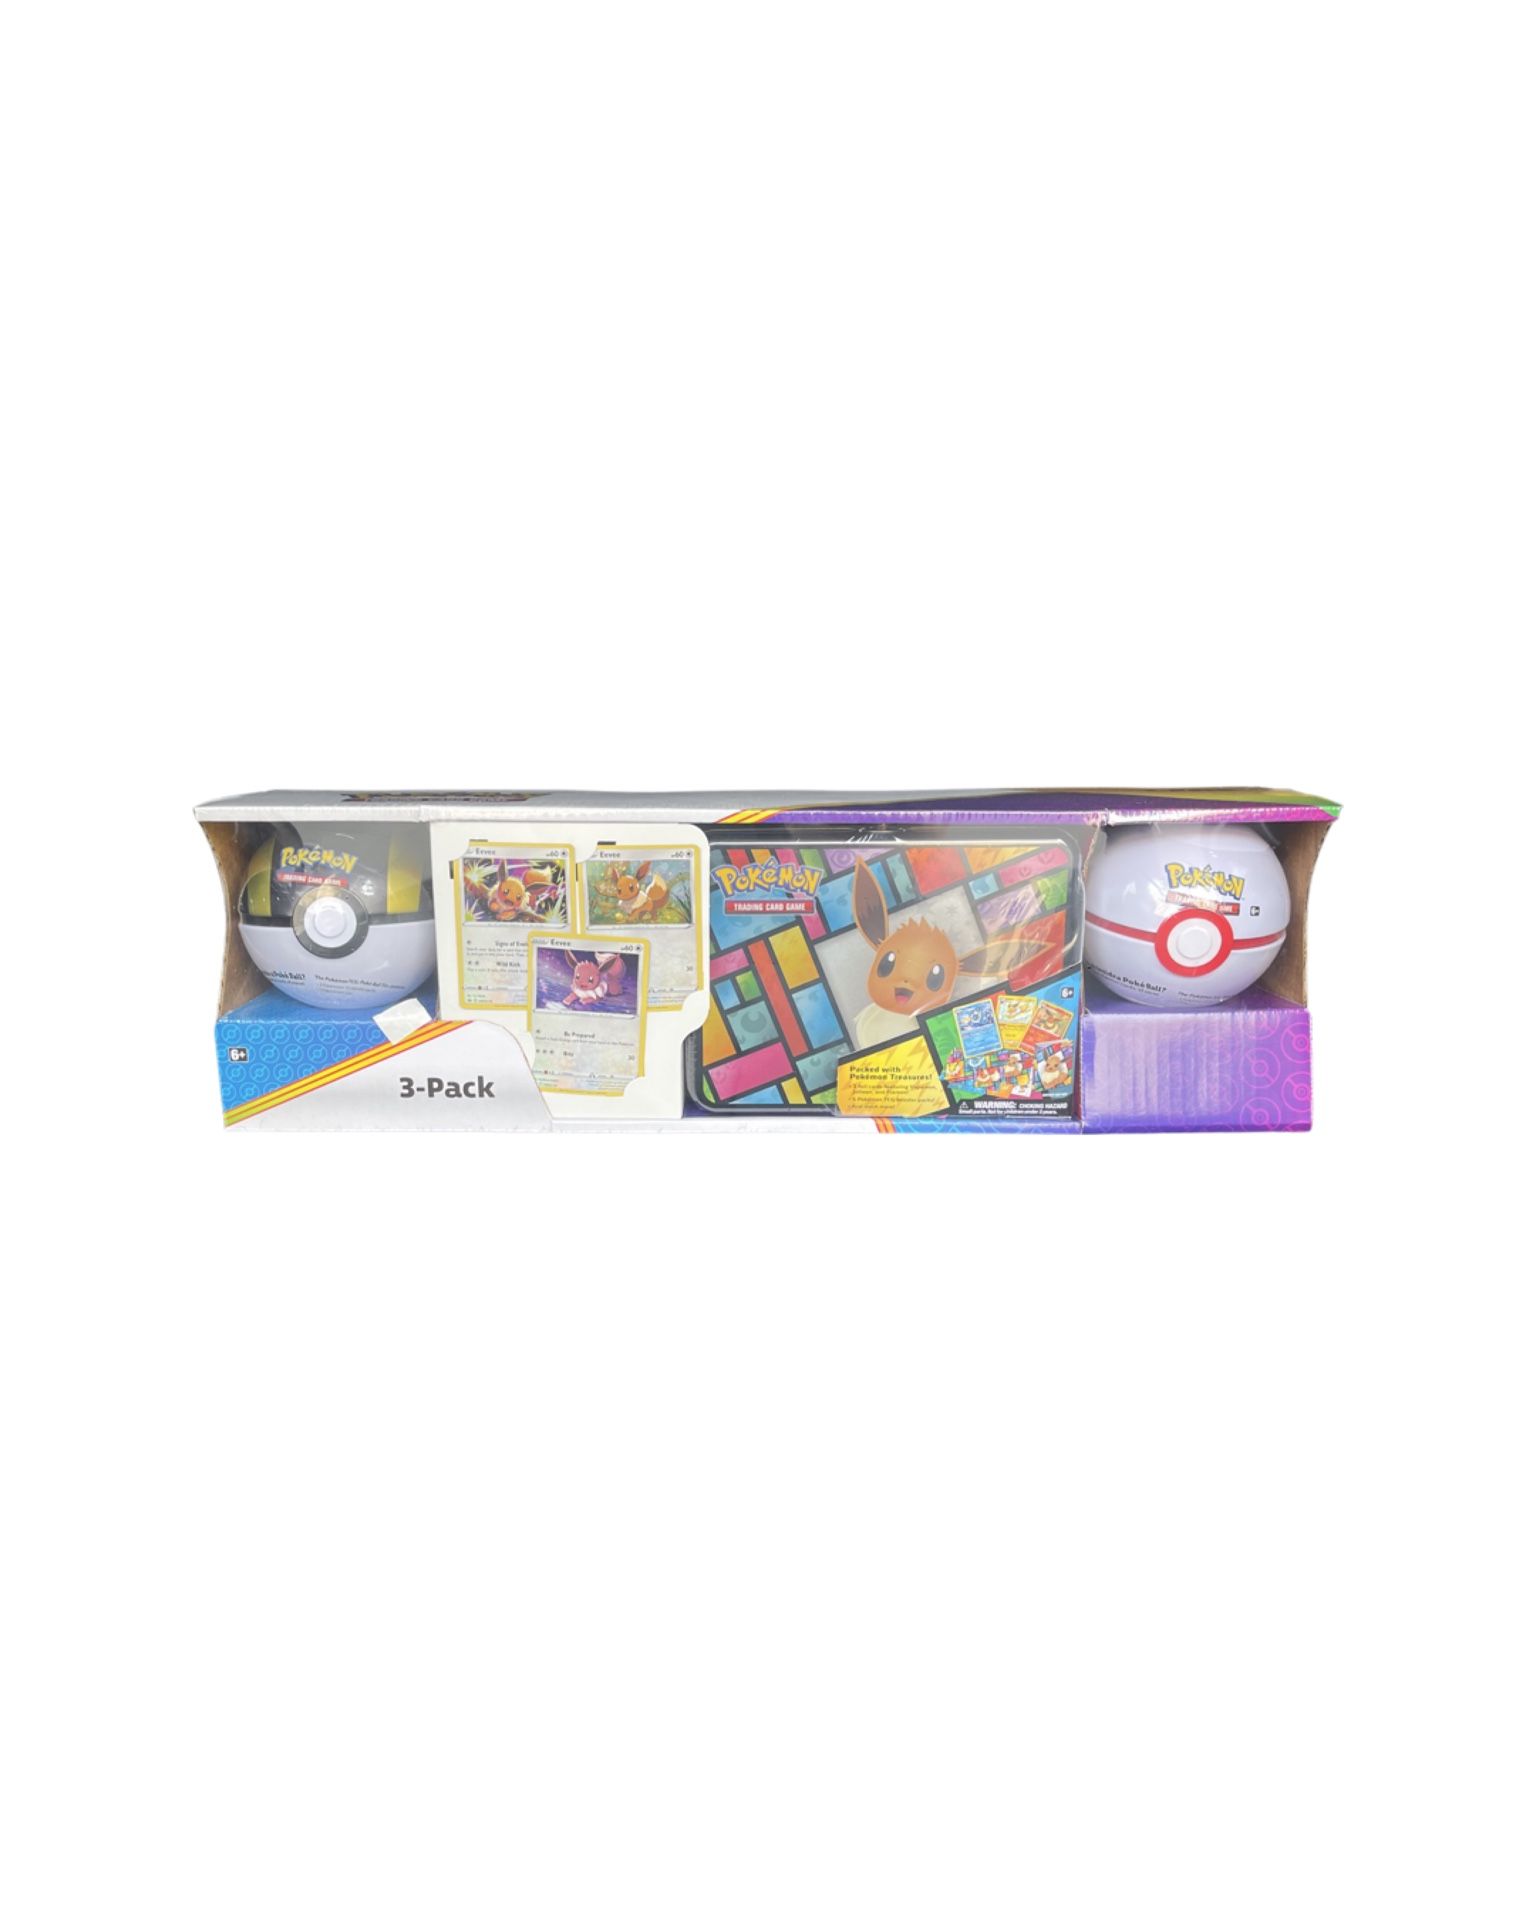 Costco Evee Pokemon Trading Cards 3-Pack  - Collector Chest & Poké Balls